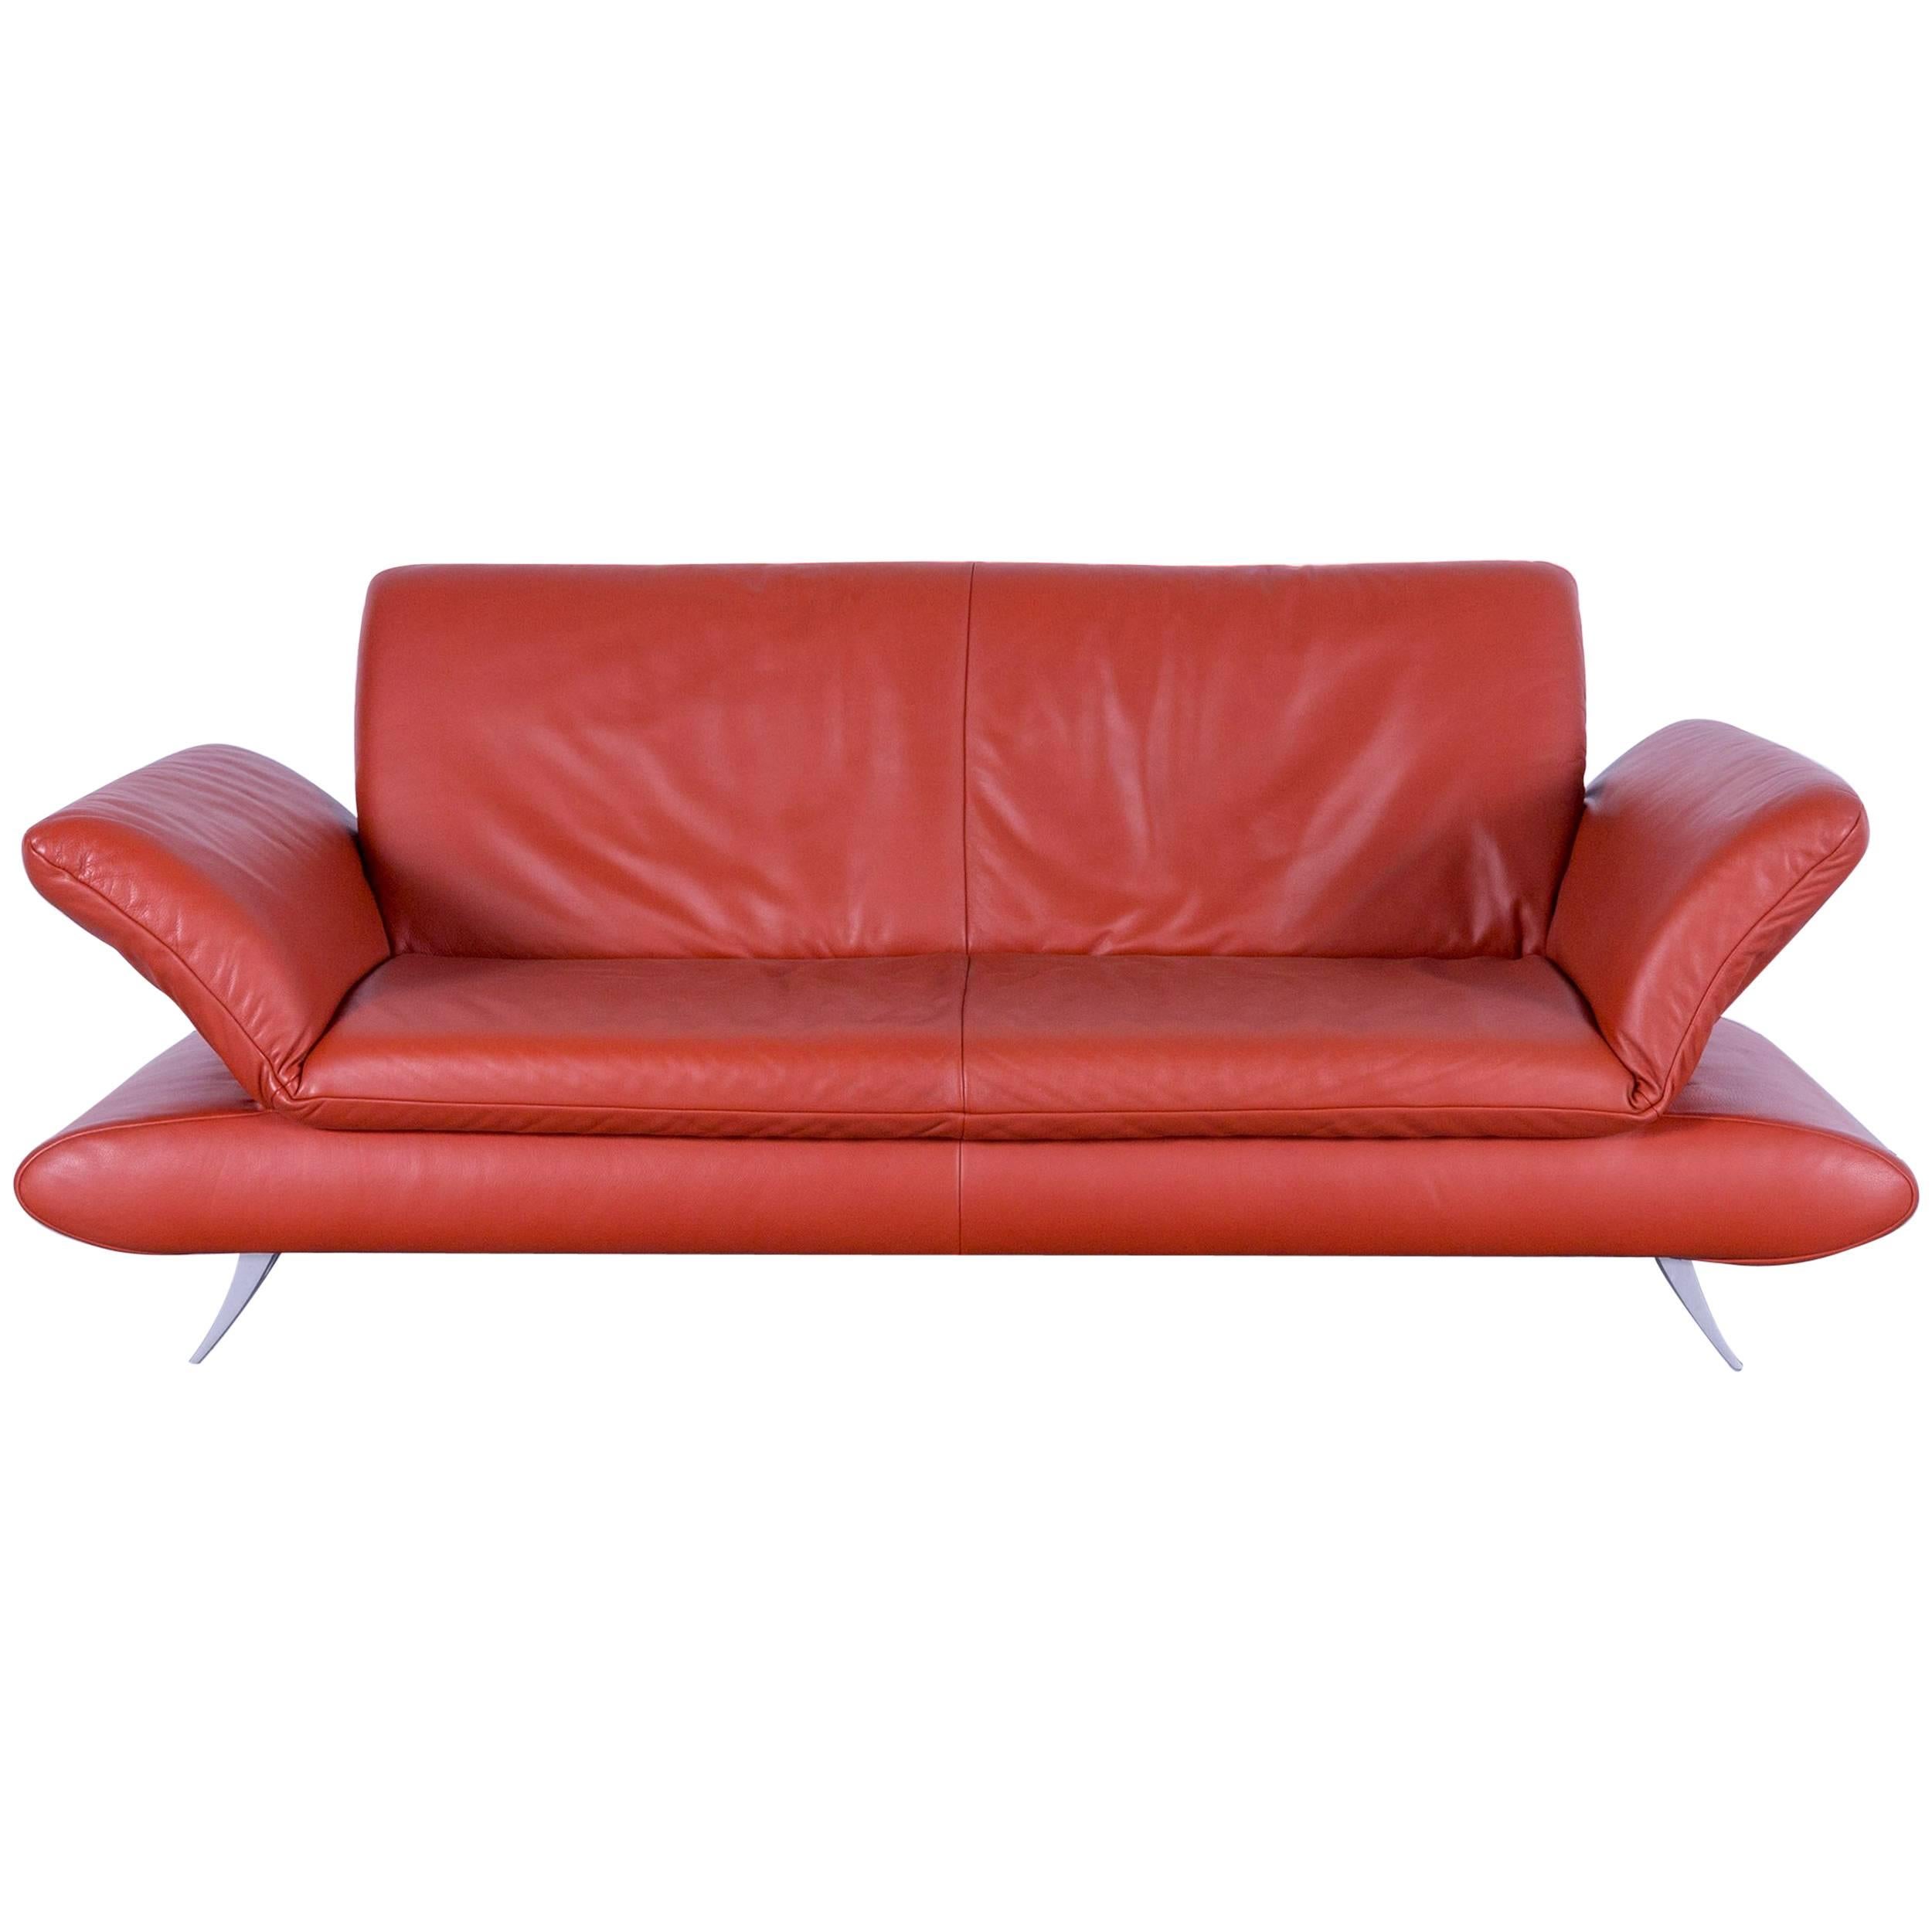 Koinor Rossini Designer Leather Sofa in Stunning Orange with Functions, Germany